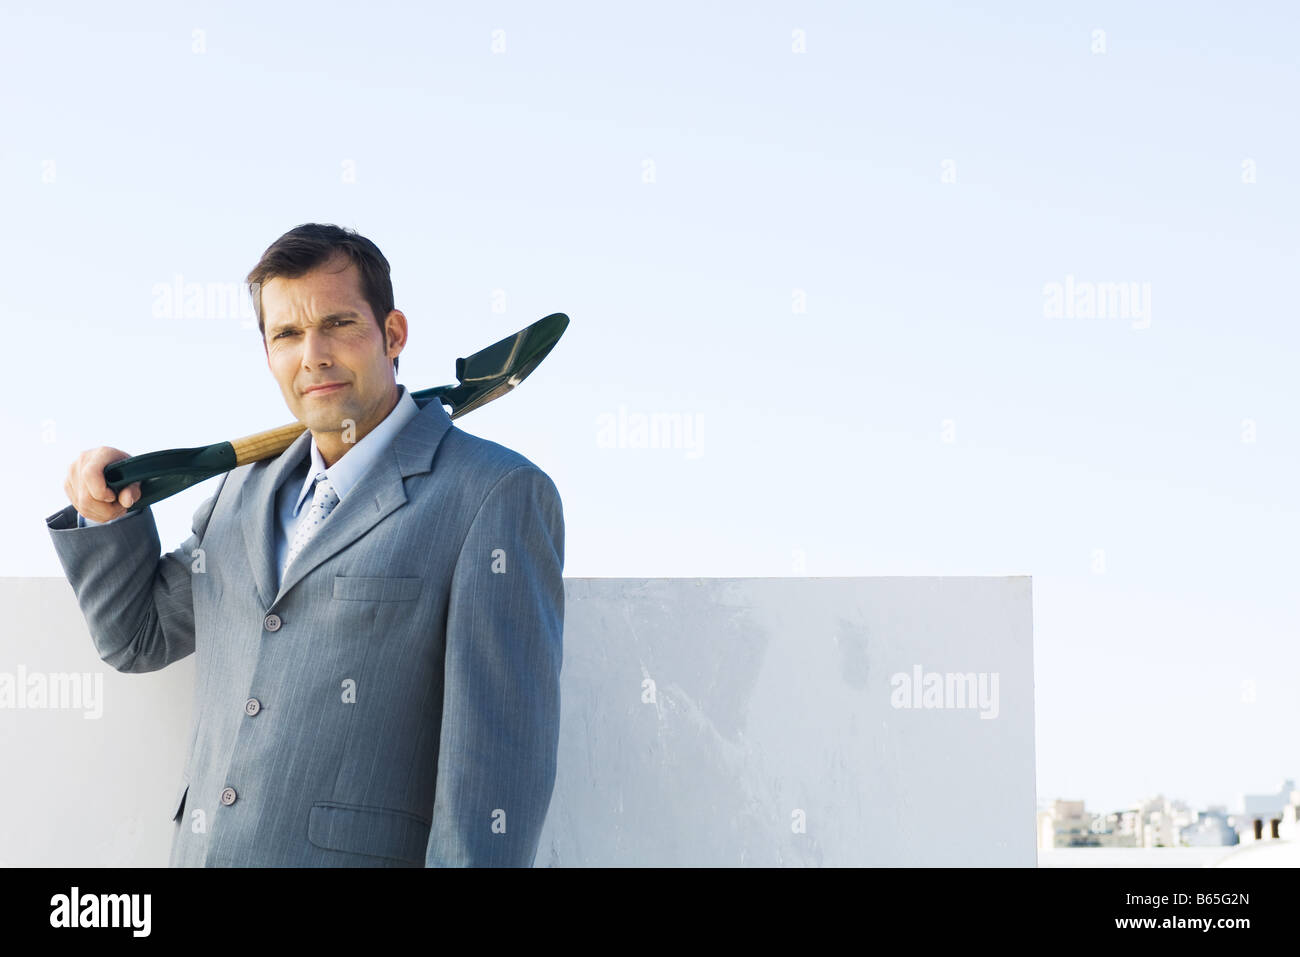 Man in suit holding shovel, looking at camera Stock Photo